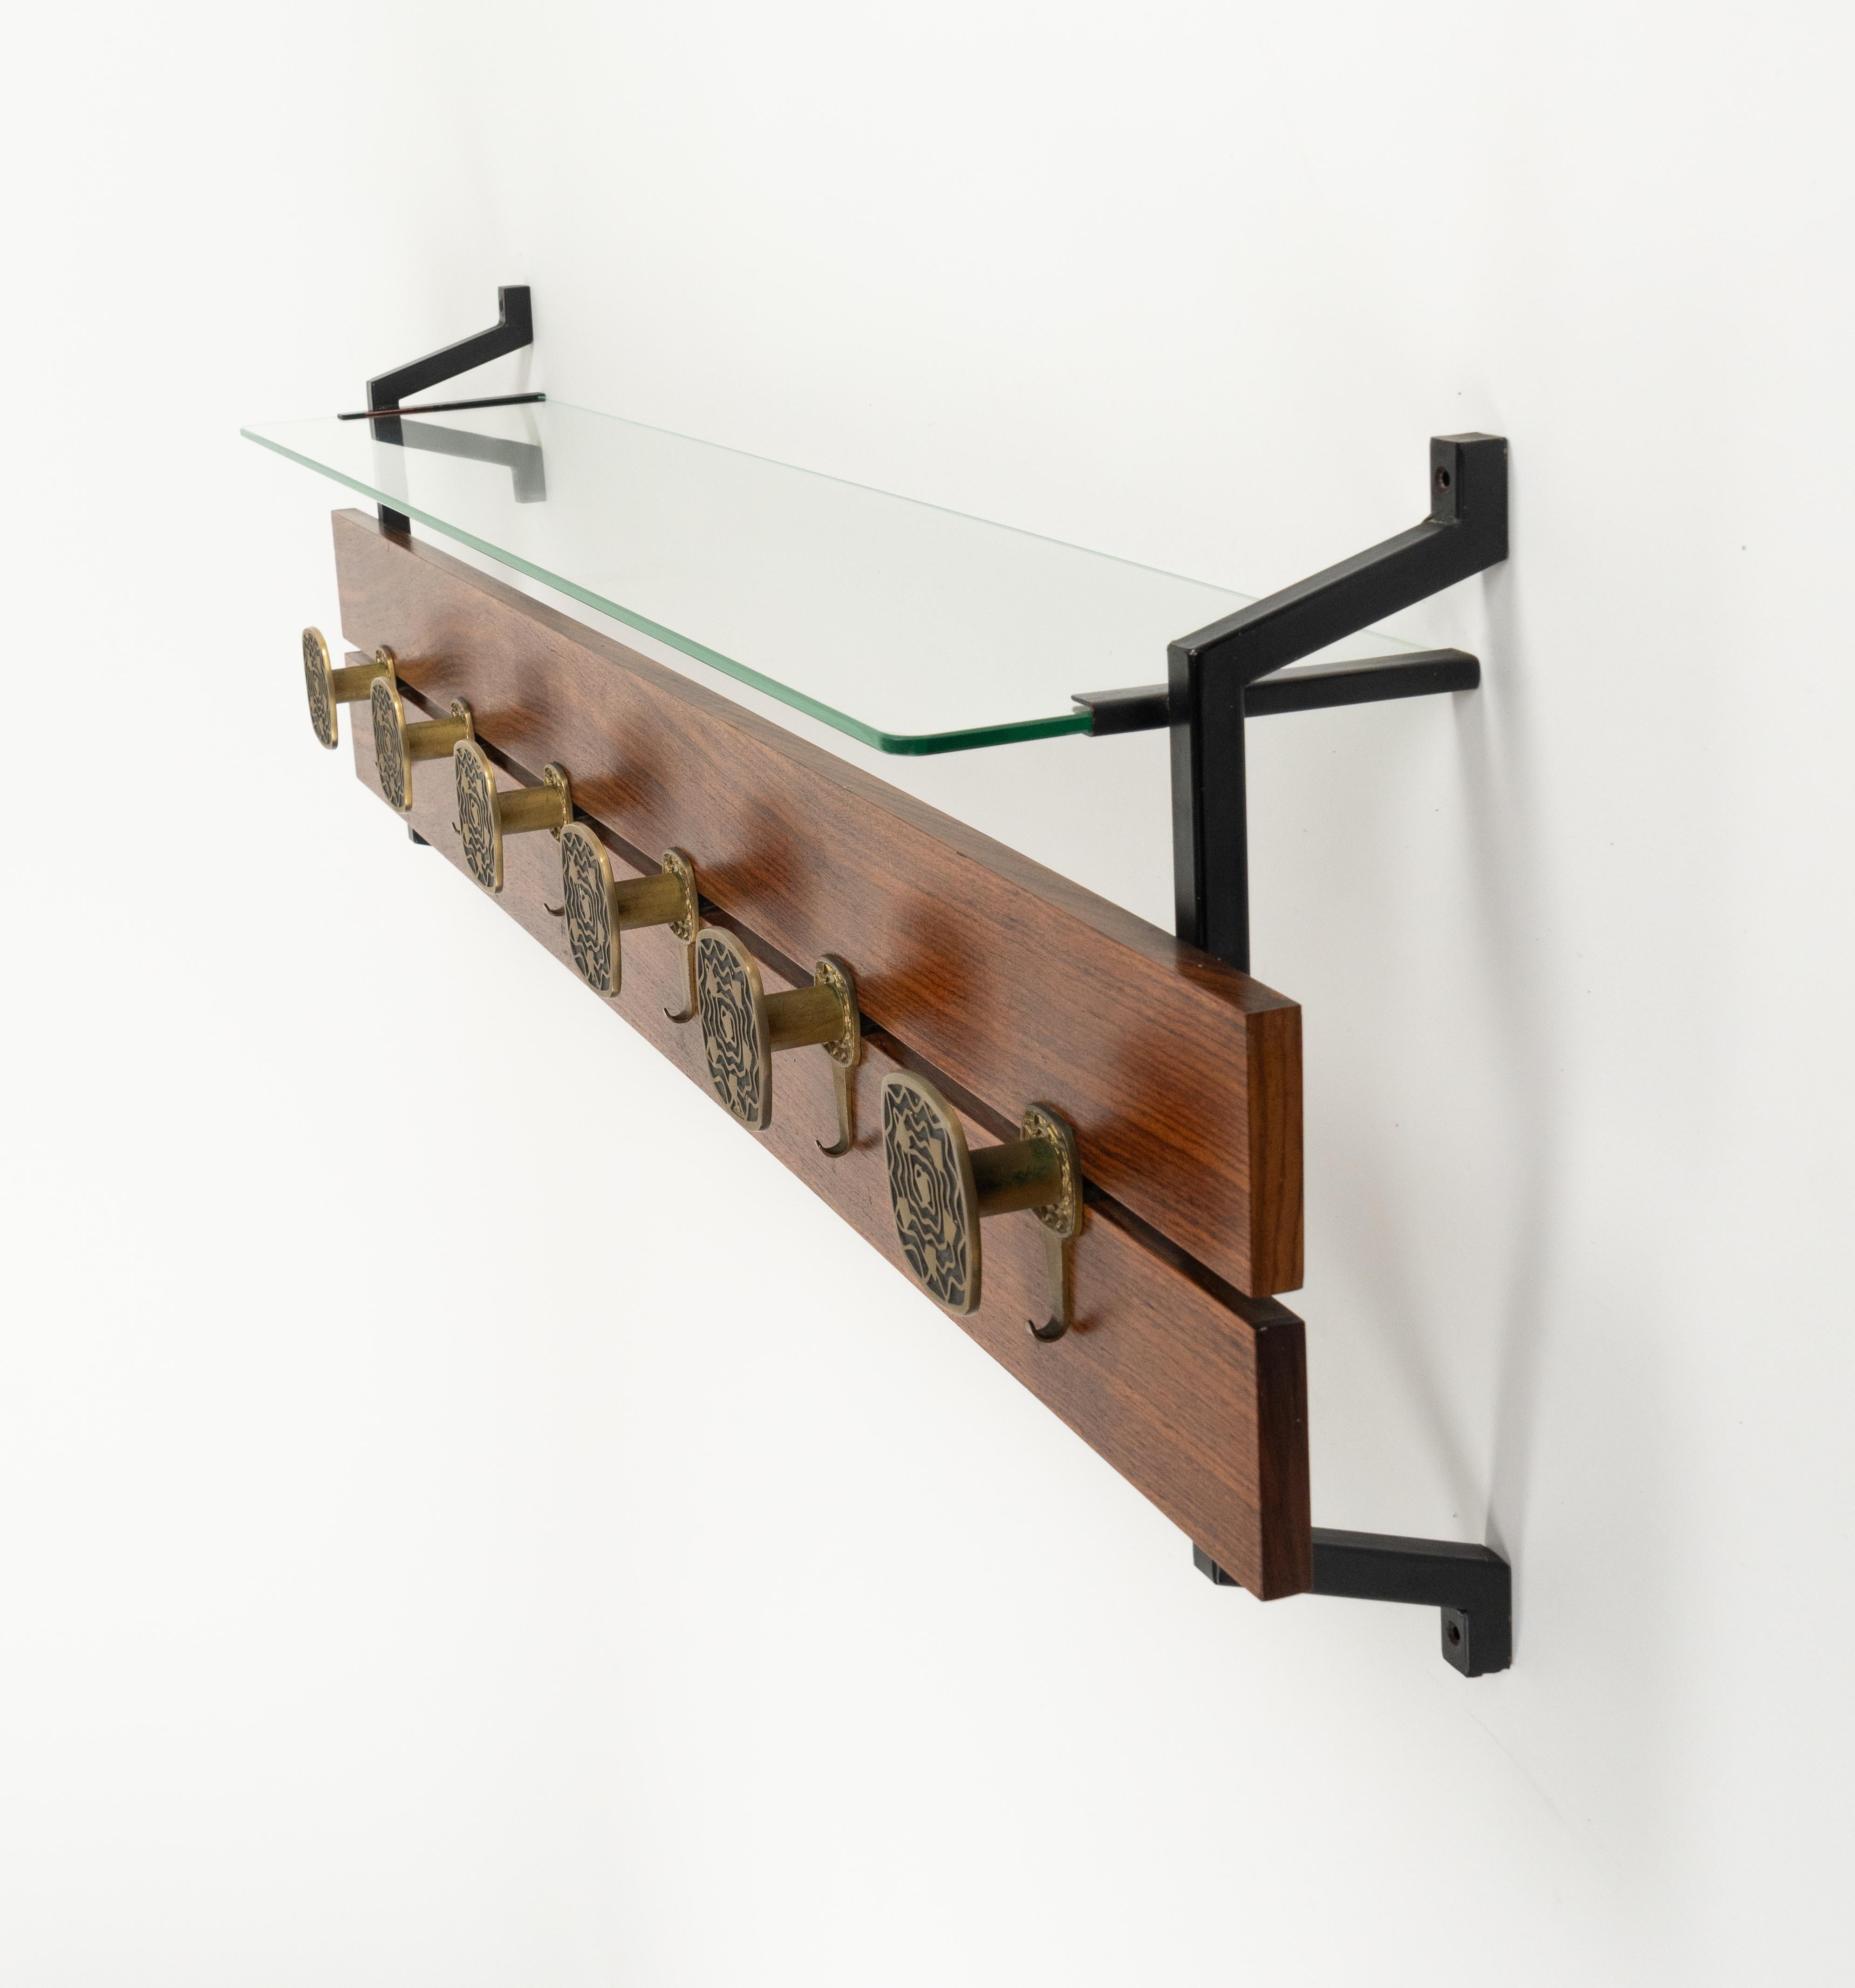 Midcentury Wood, Glass and Brass Coat Rack Herta Baller Style, Italy 1970s For Sale 4